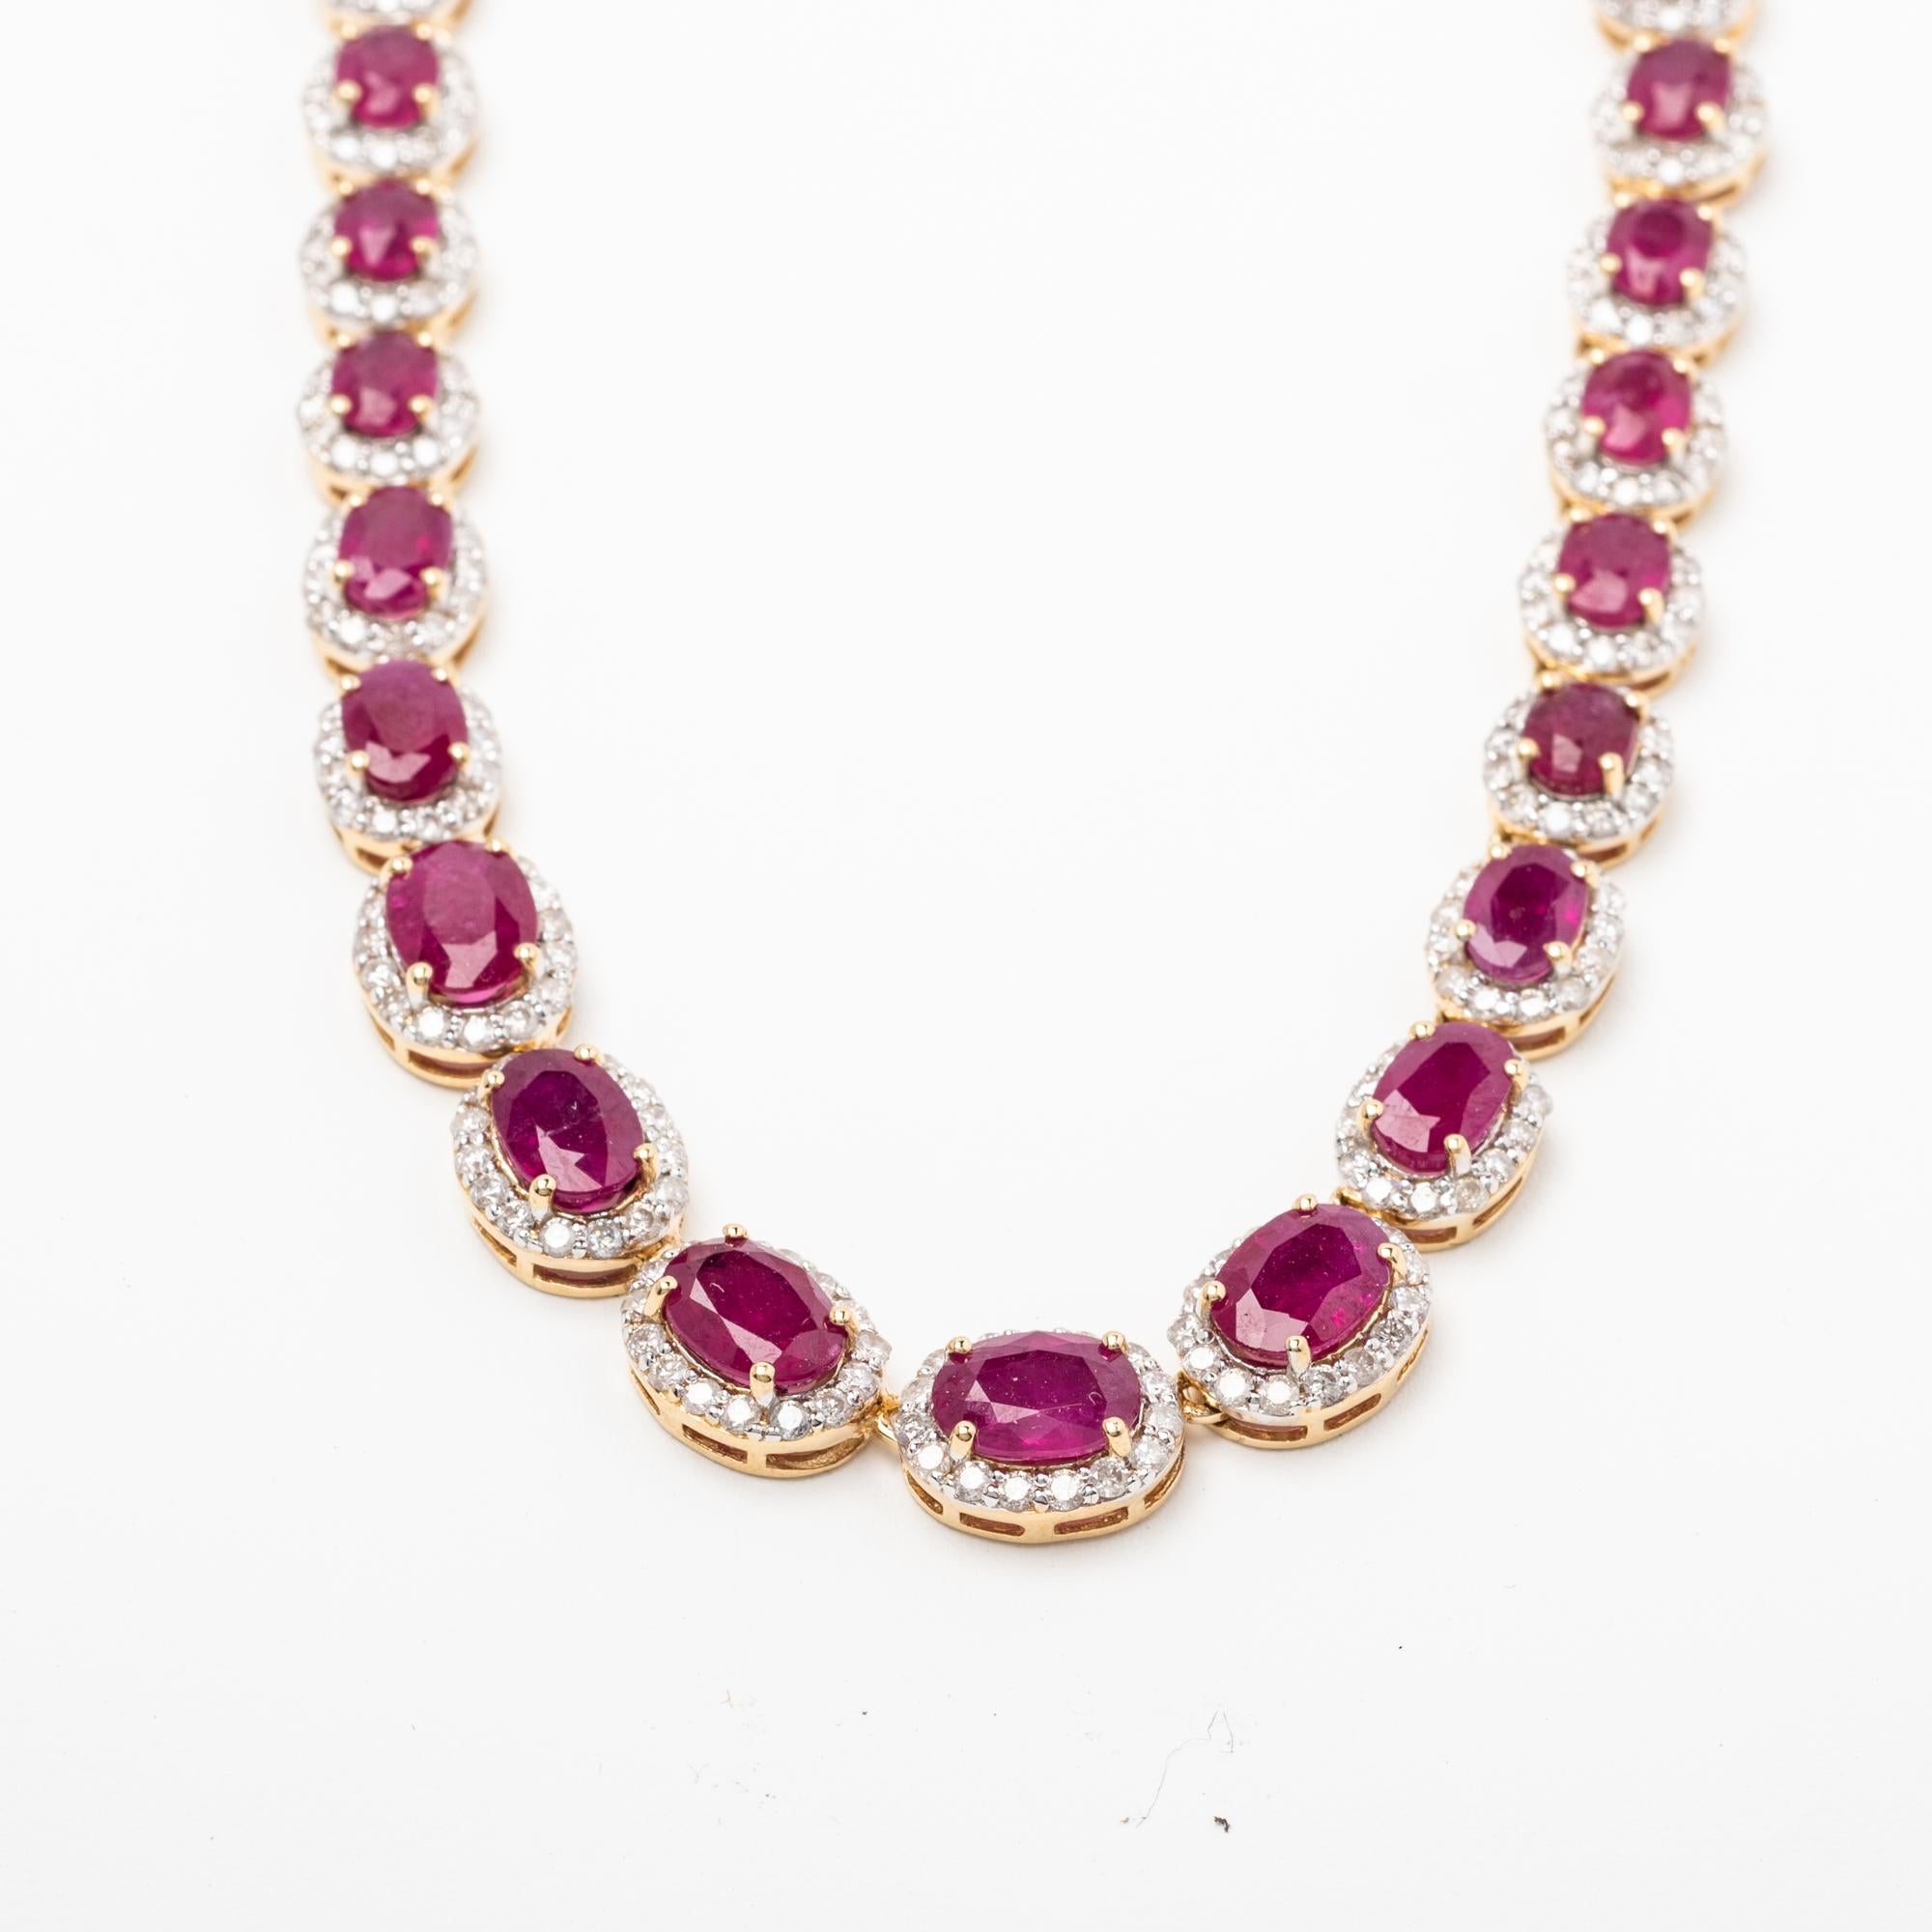 Ruby and Diamond Necklace
Designed as a line of oval-shaped rubies, framed and accented by round diamonds, set with 50 oval faceted Rubies weighing approximately 27.66 carats, and 1260 round-cut diamonds weighing approximately 6.08 carats, length 17